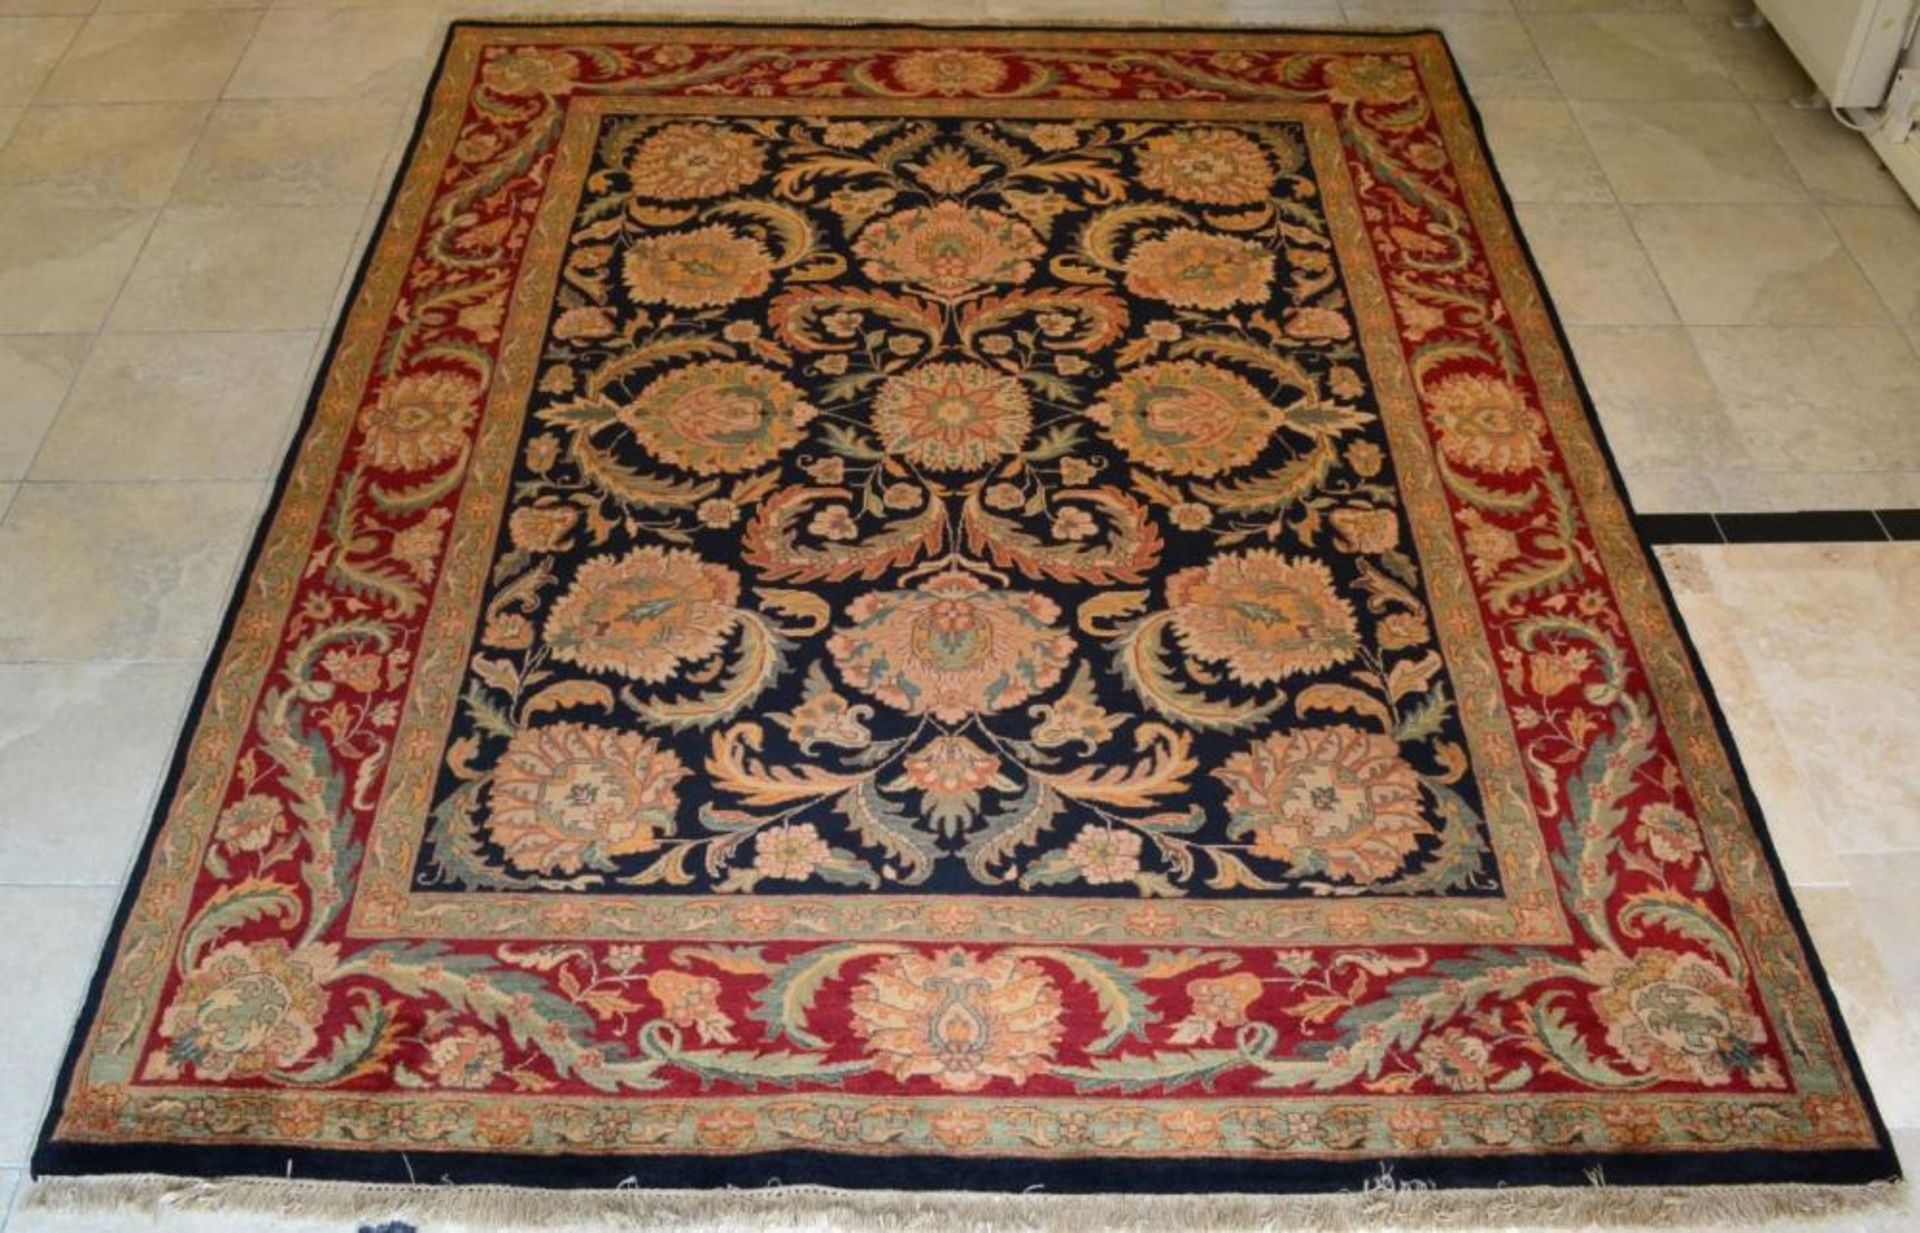 1 x Red and Black Jaipur Handknotted Carpet - Handwoven In Jaipur With Handspun Wool And Vegetable D - Image 3 of 16